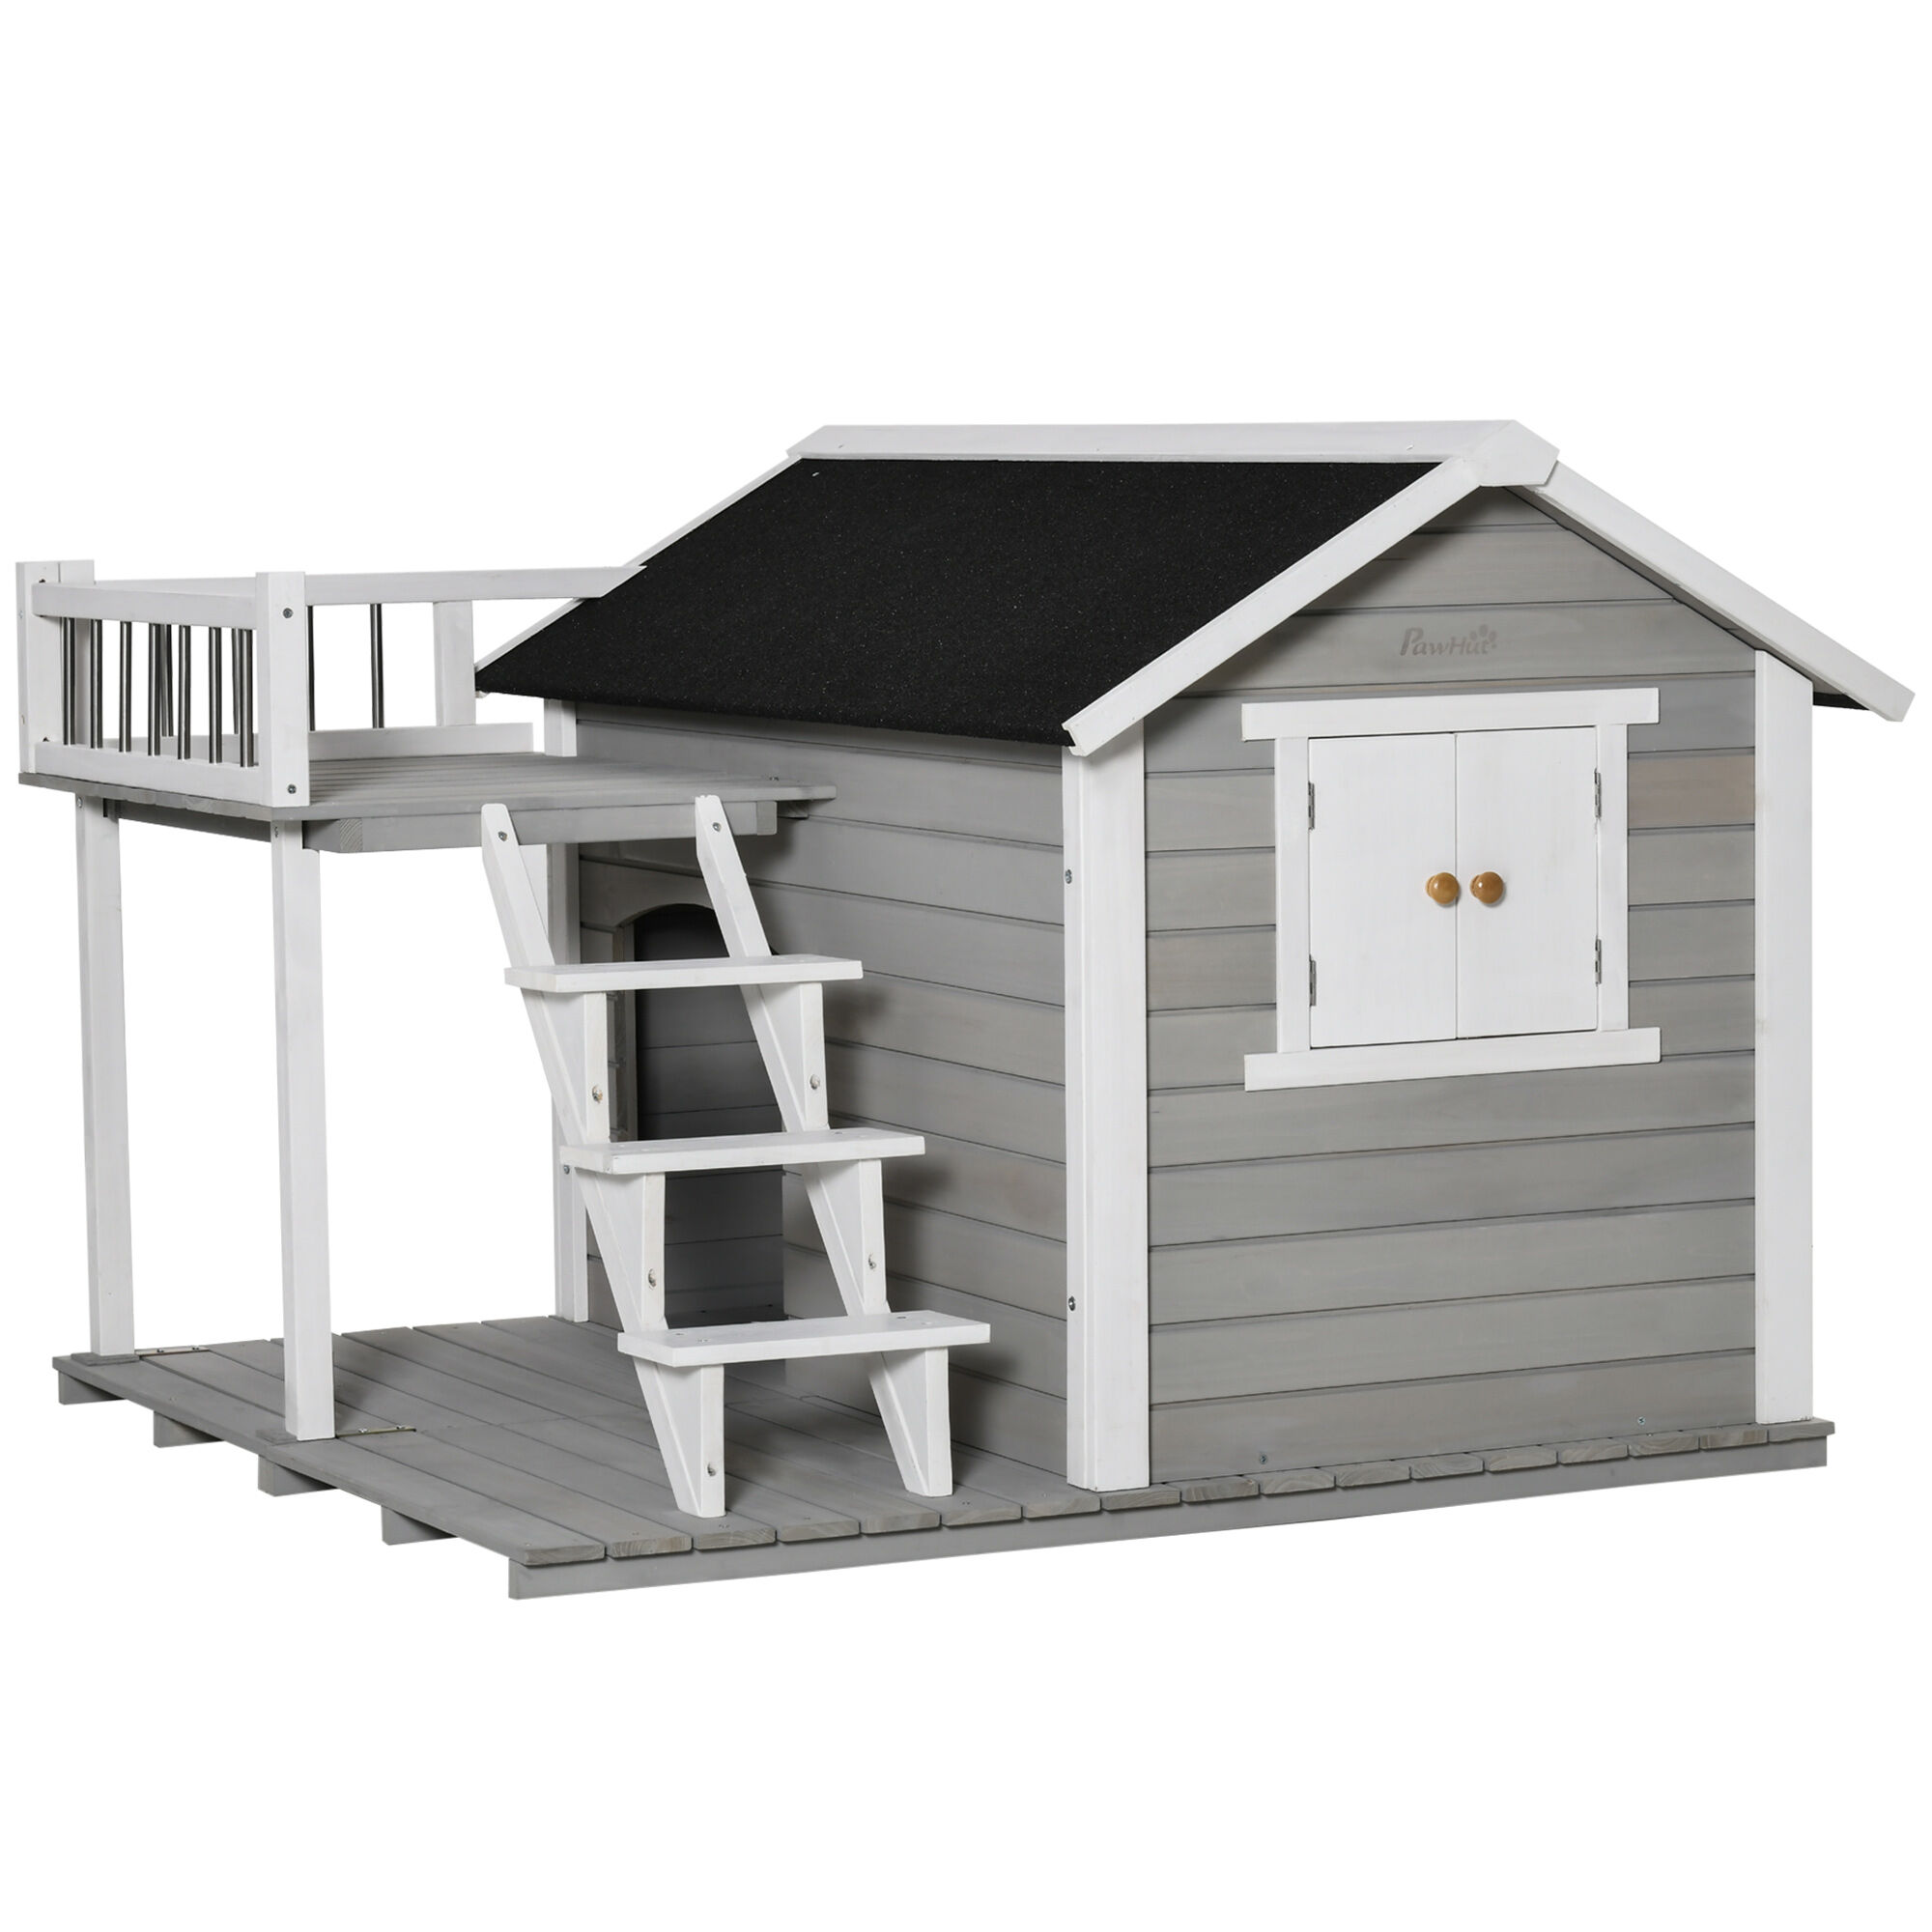 PawHut Wooden Outdoor Dog House 2-Tier Raised Pet Shelter with Stairs Weather Resistant Roof Balcony for Medium Large Dogs Up To 55 lbs   Aosom.com